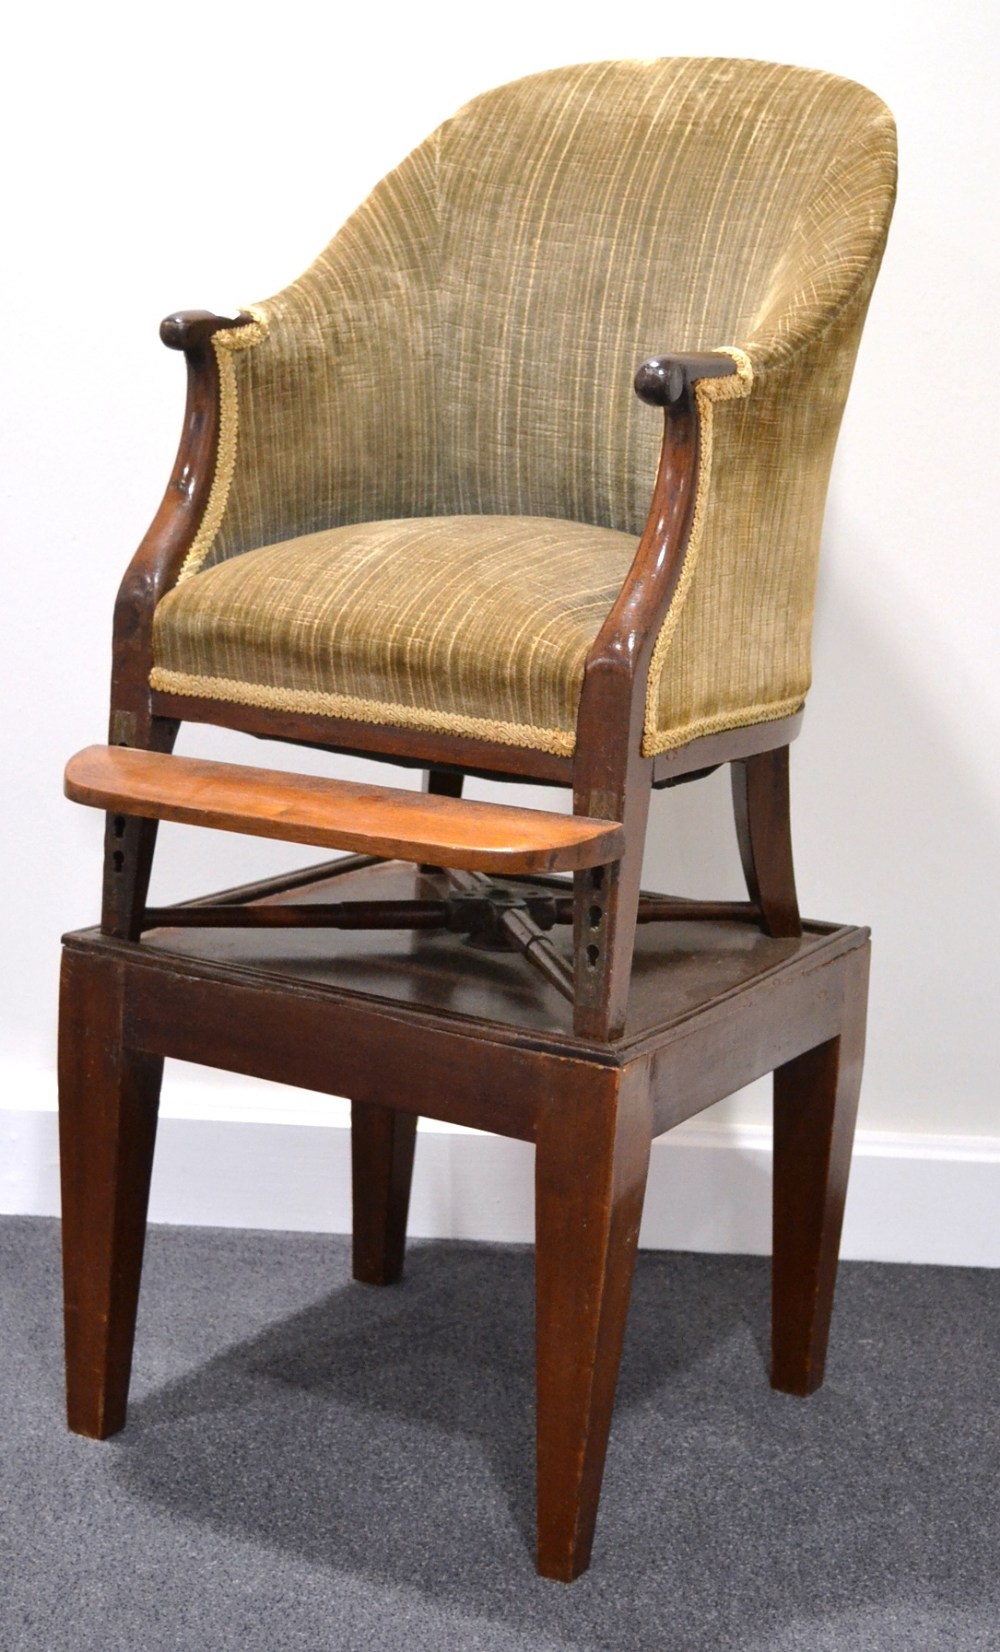 A Mid 19th Century Mahogany Child's Correction Armchair, recovered in grey velvet, the overstuffed